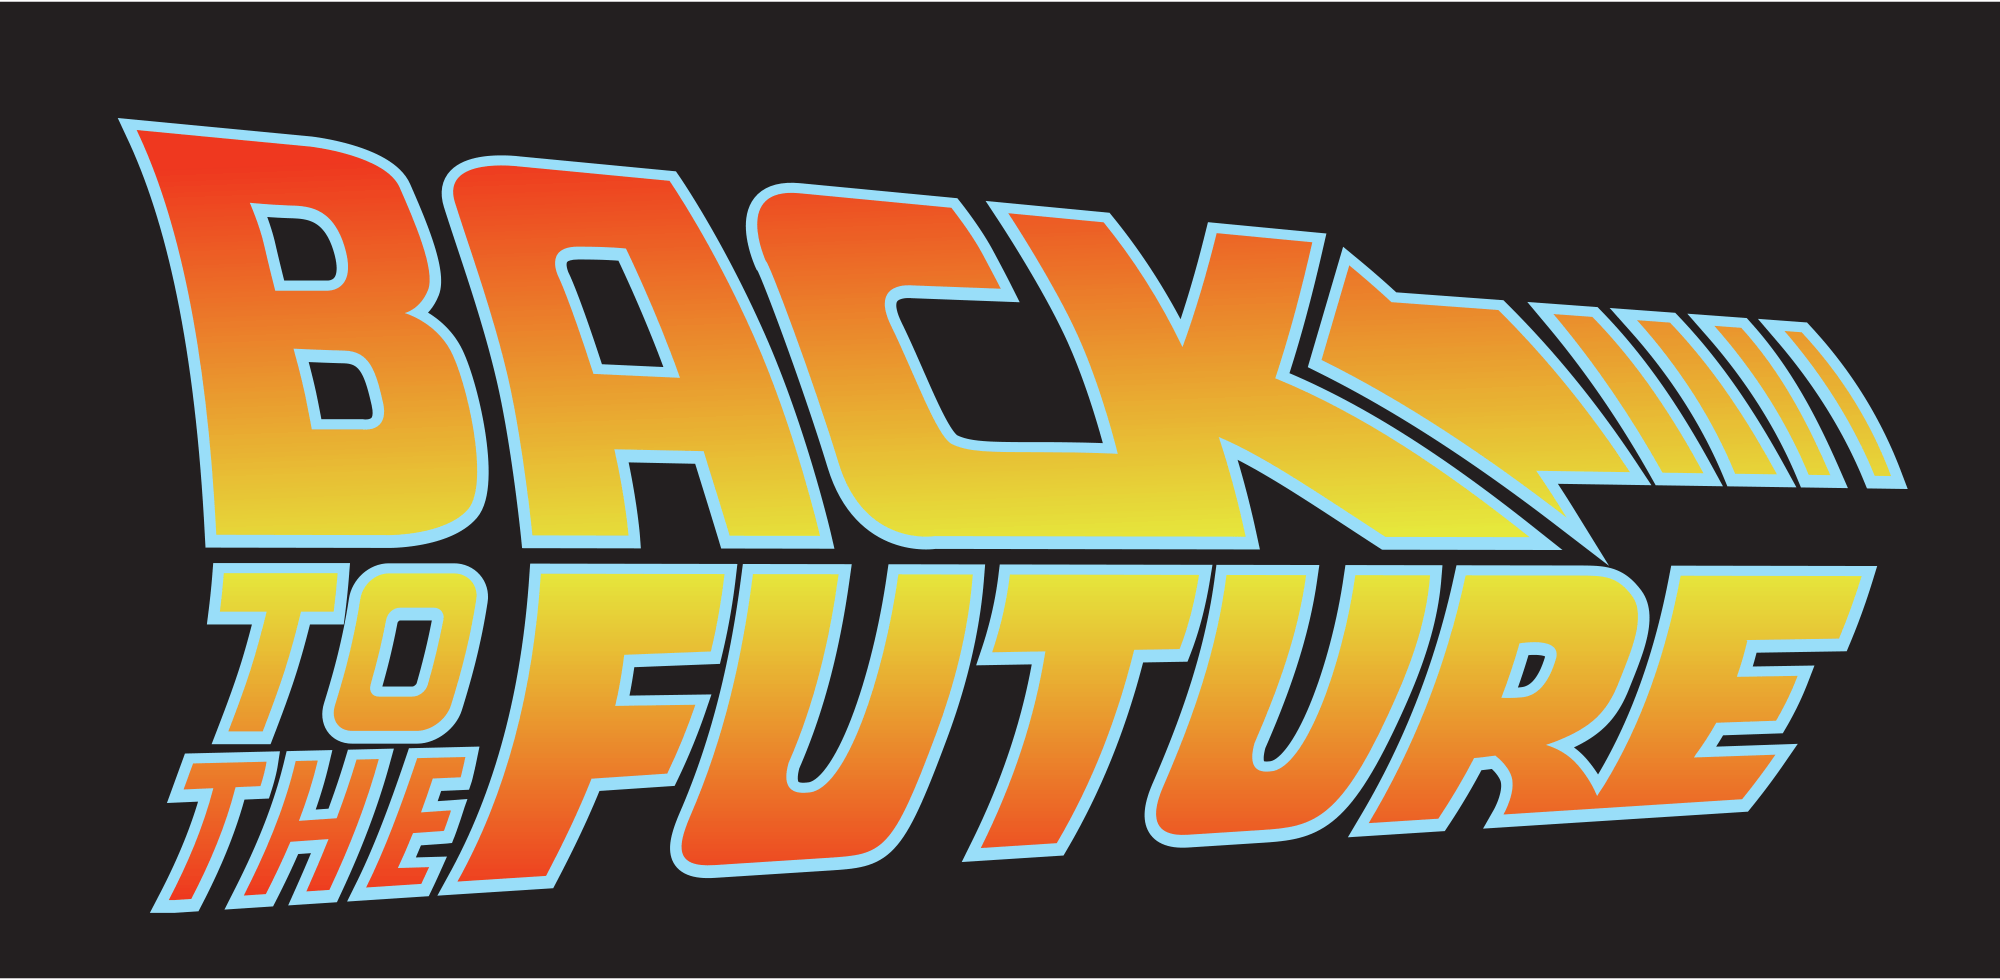 BTTF Logo - back to the future logo - Google Search | Cakes | Pinterest | Back ...